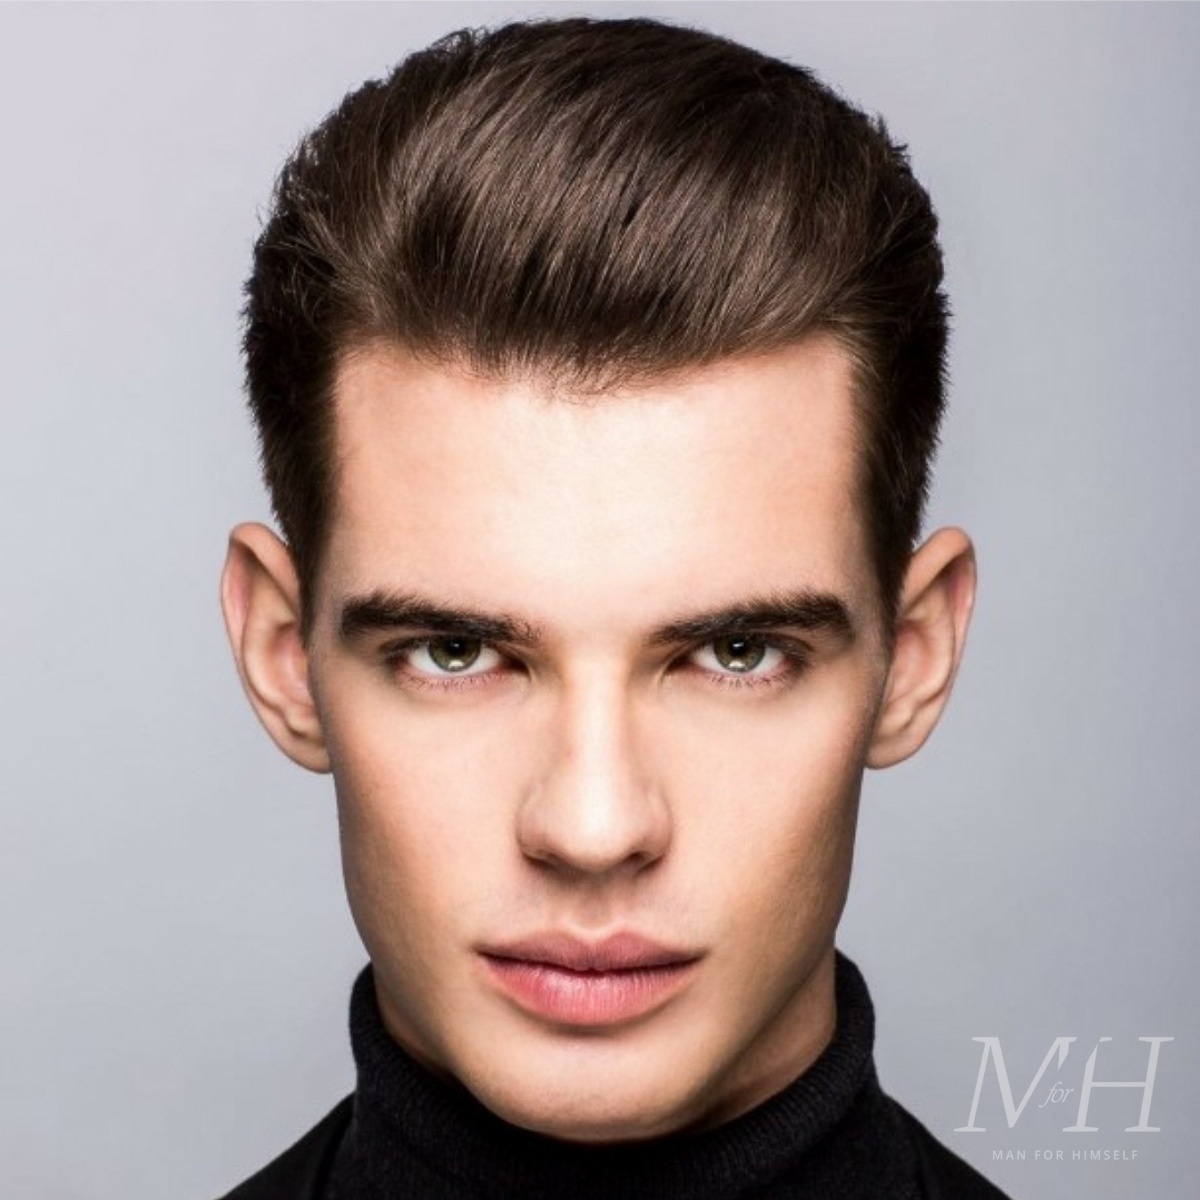 mens hairstyle haircut classic sweep back MFH7 man for himself